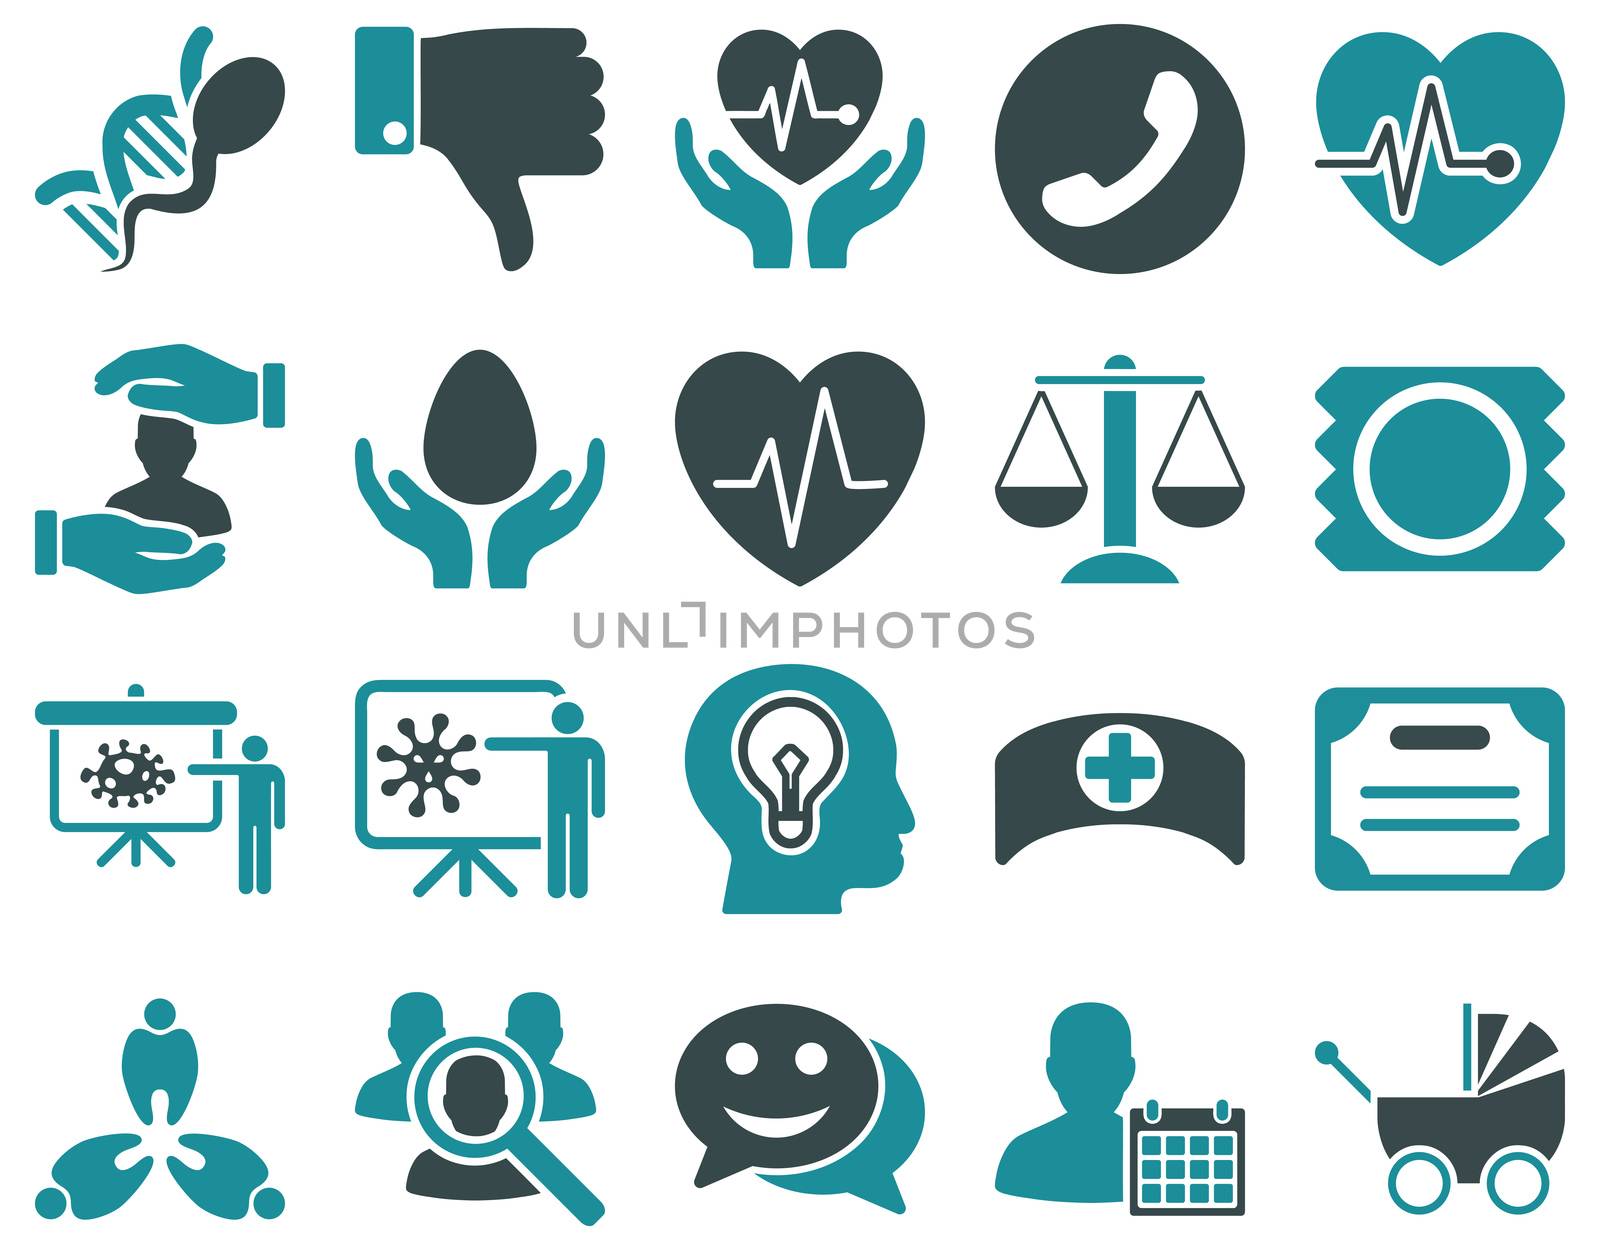 Medical icon set. Style: bicolor icons drawn with soft blue colors on a white background.